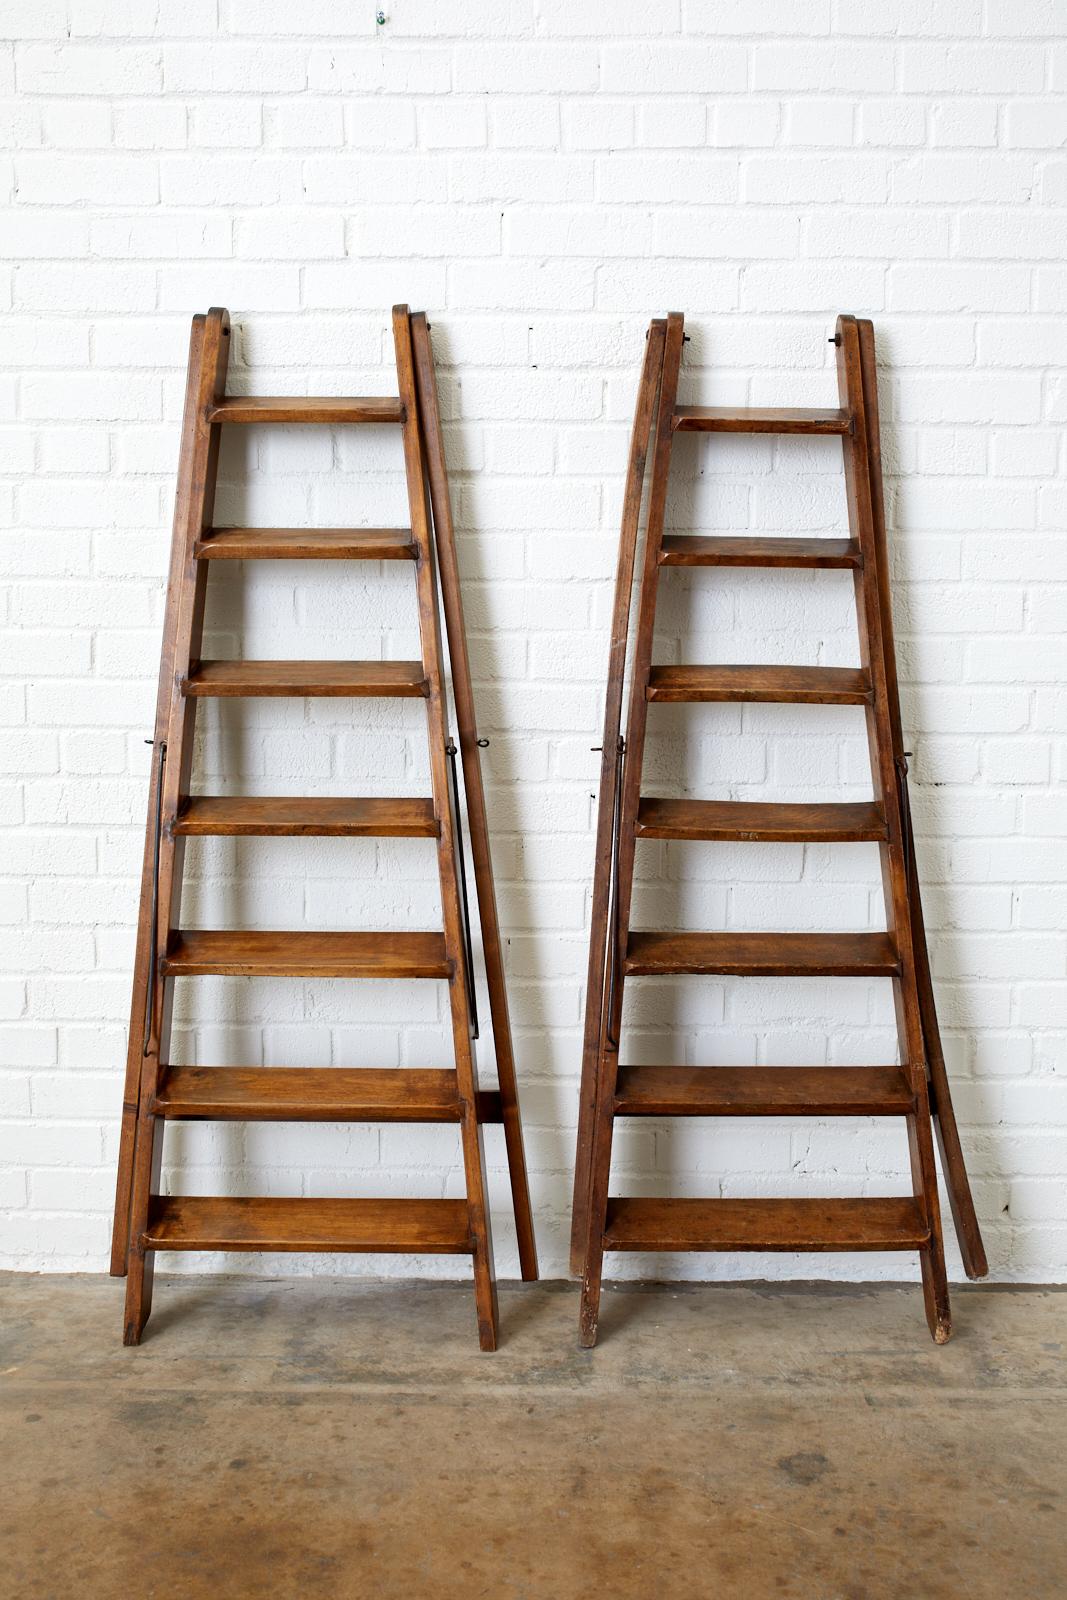 Handsome pair of late 19th century French country folding library ladders. Featuring a handcrafted design with seven rungs or steps and iron hardware. From an estate in Santa Barbara, CA.